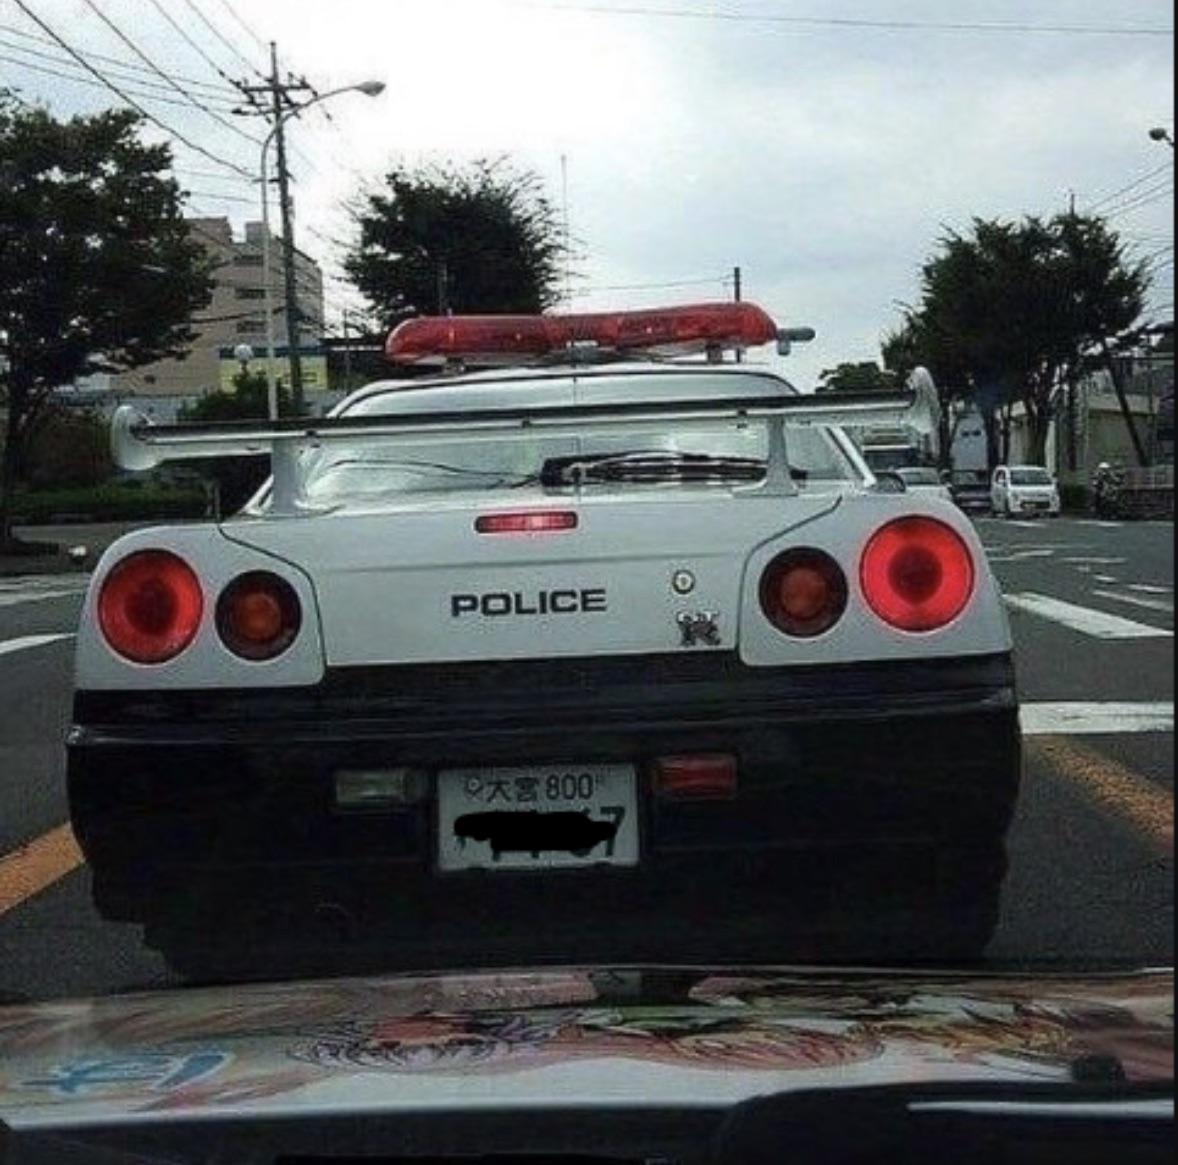 Nissan Skyline GT-R BNR34 operated by Saitama Prefectural Police in Japan